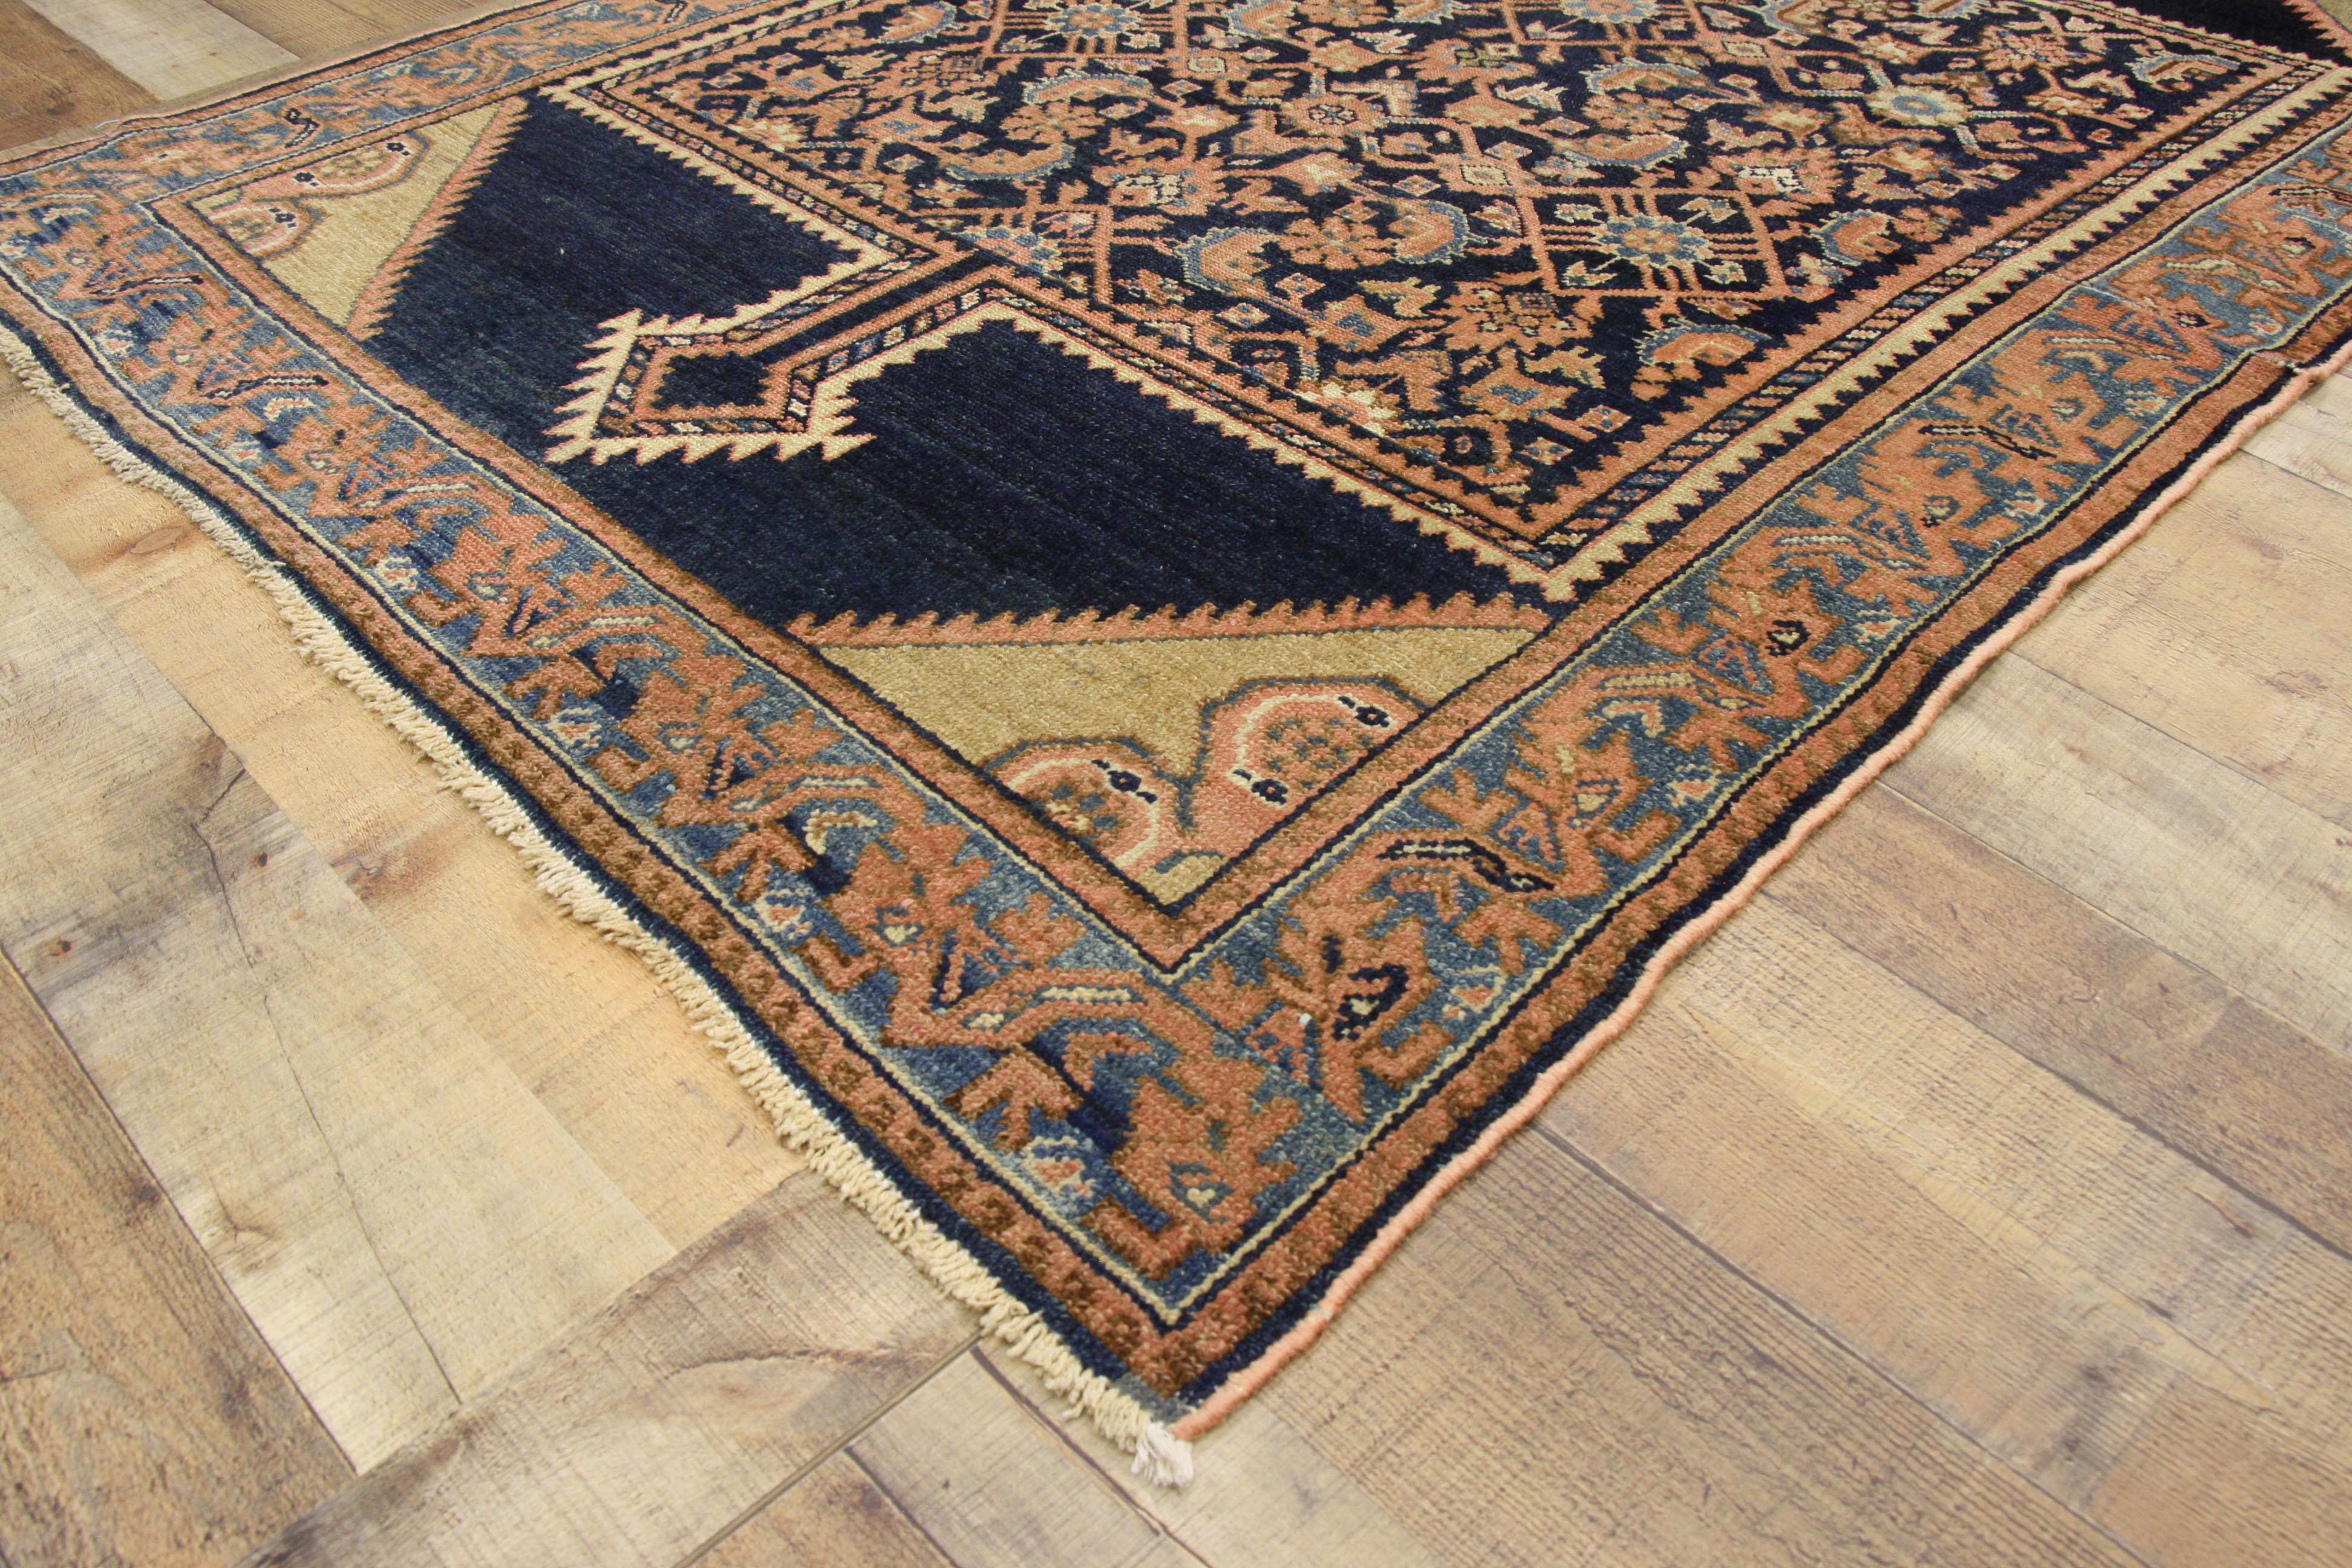 Antique Persian Malayer Rug with Rustic Romantic Georgian Style In Good Condition For Sale In Dallas, TX